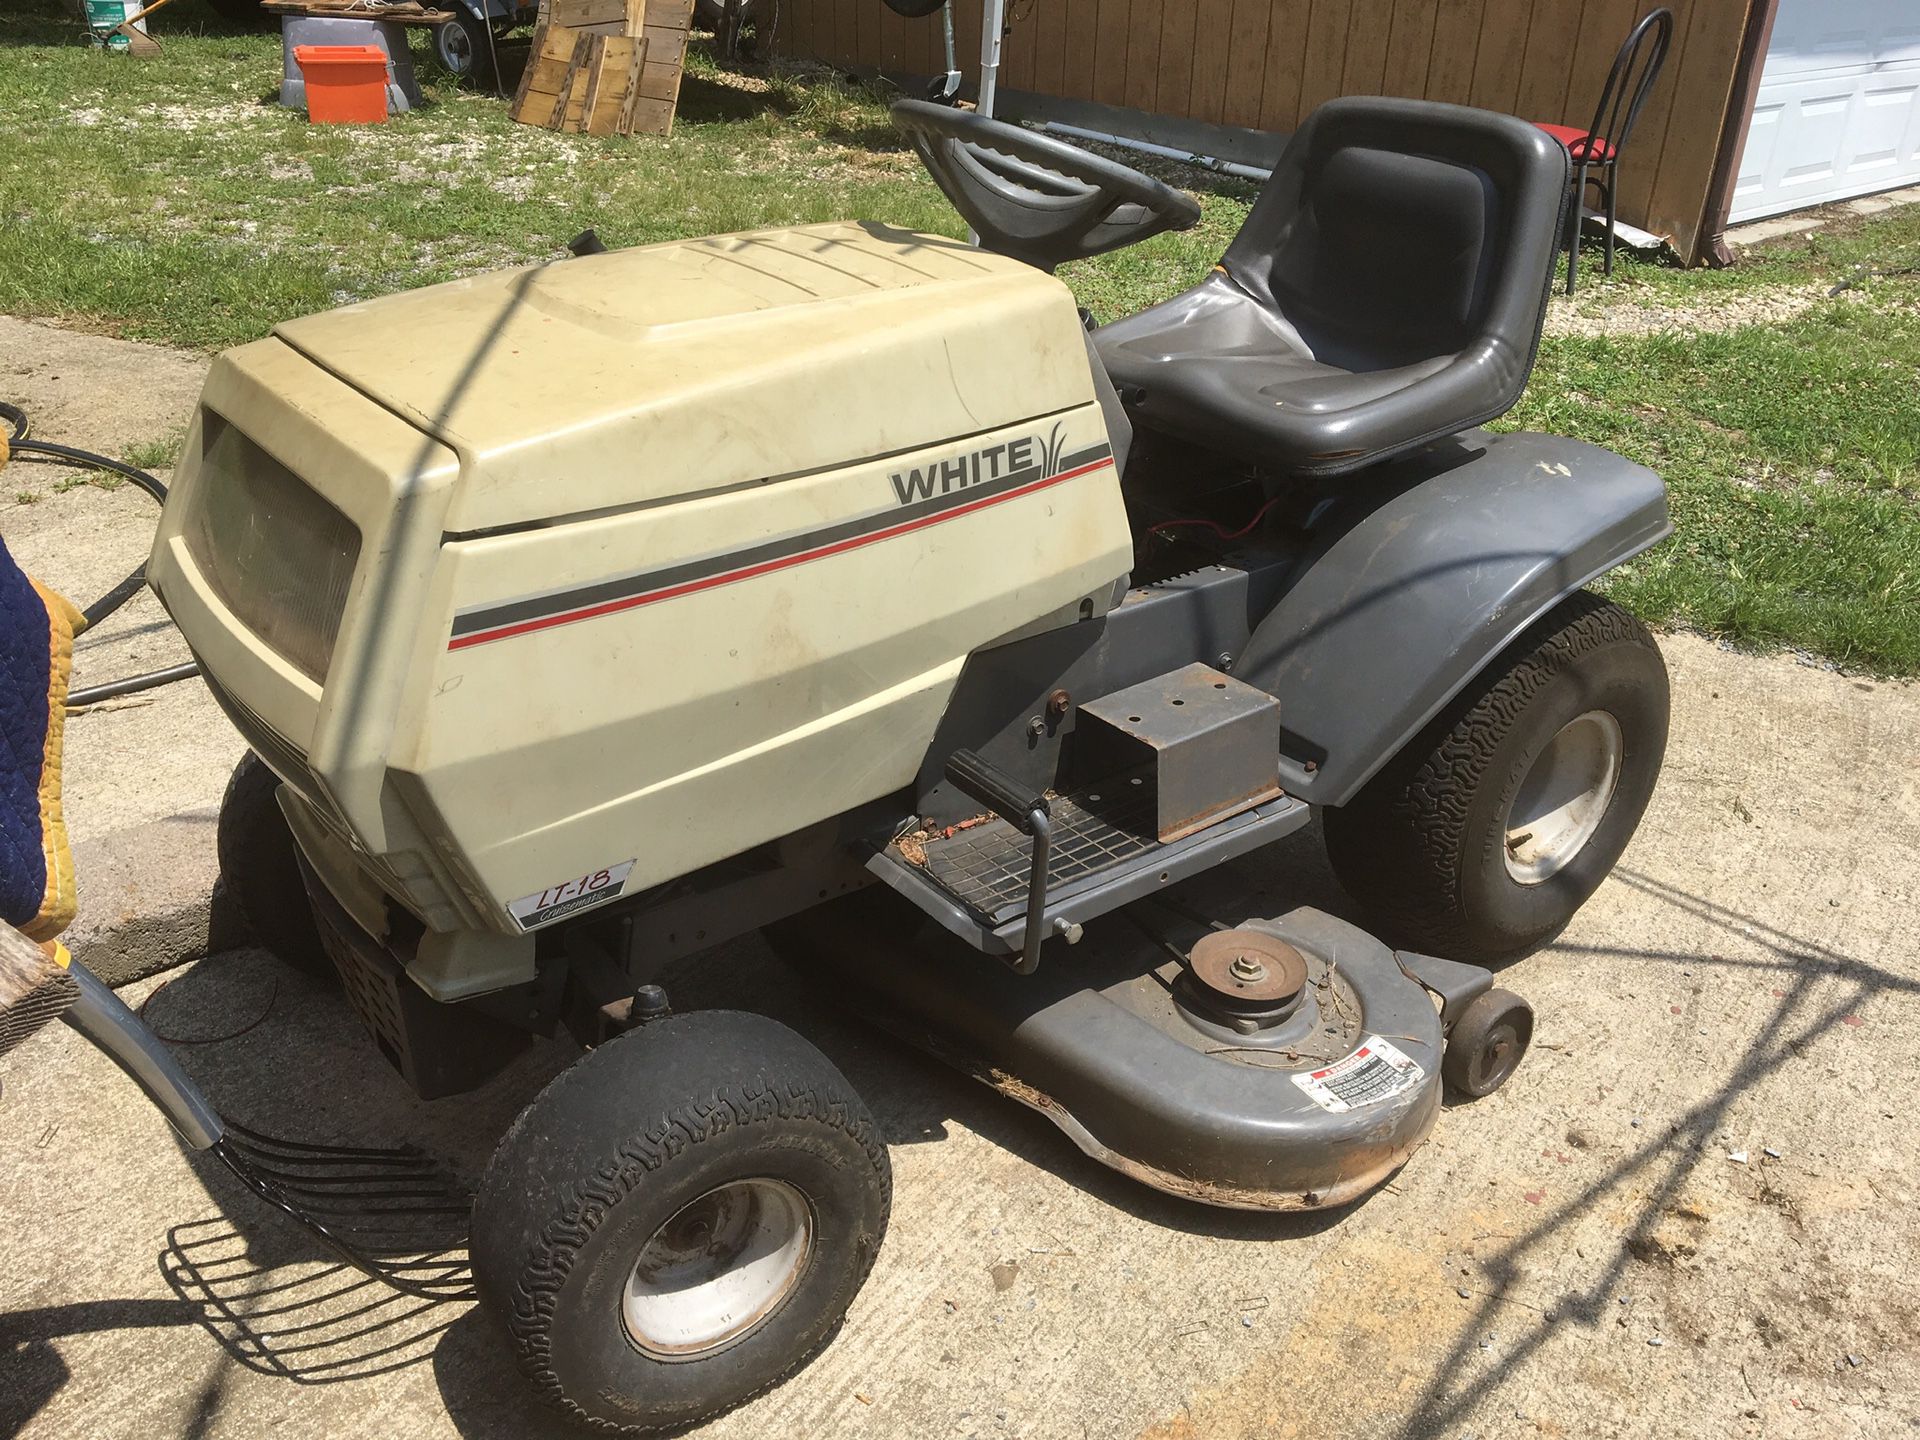 MUST SELL- good riding mower